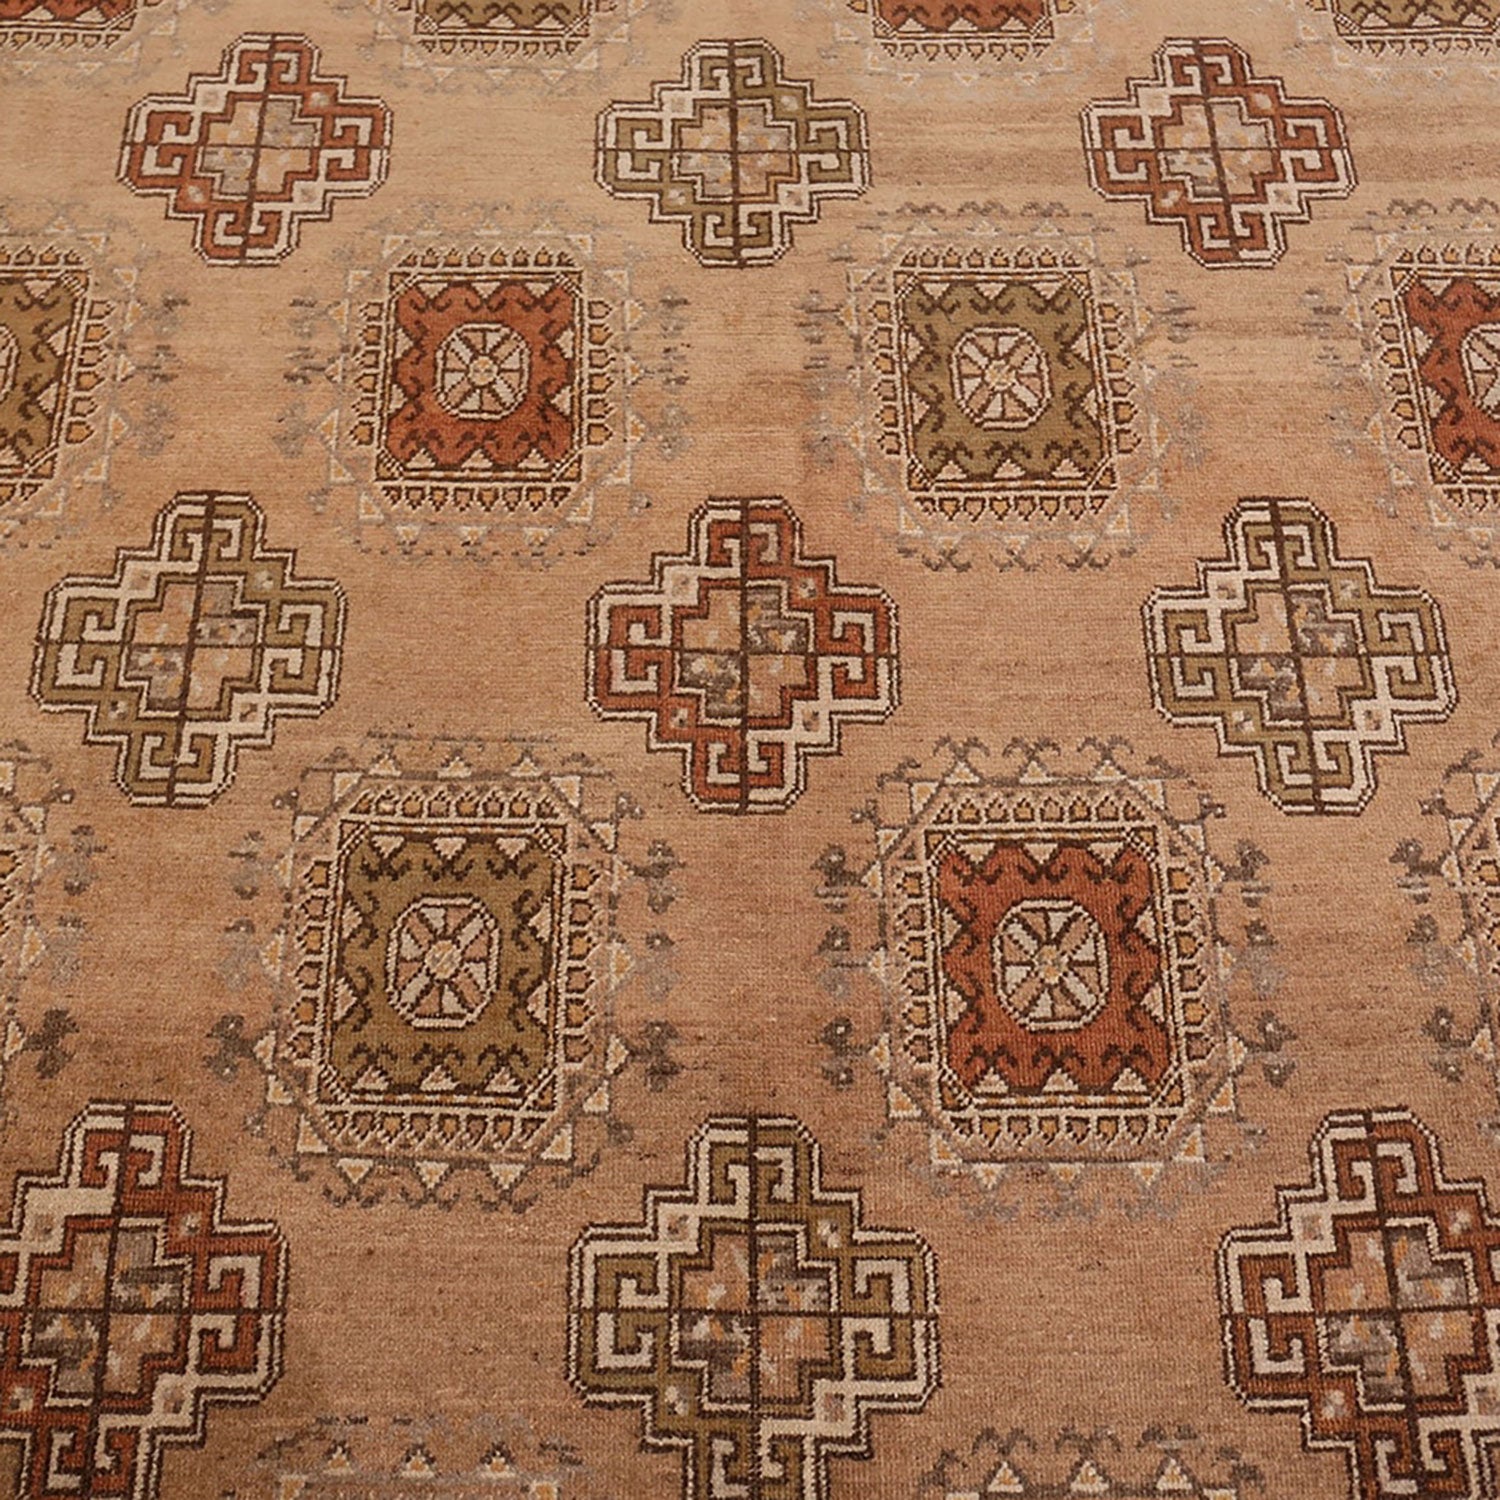 Intricately woven oriental-style rug showcases geometric patterns in earthy tones.